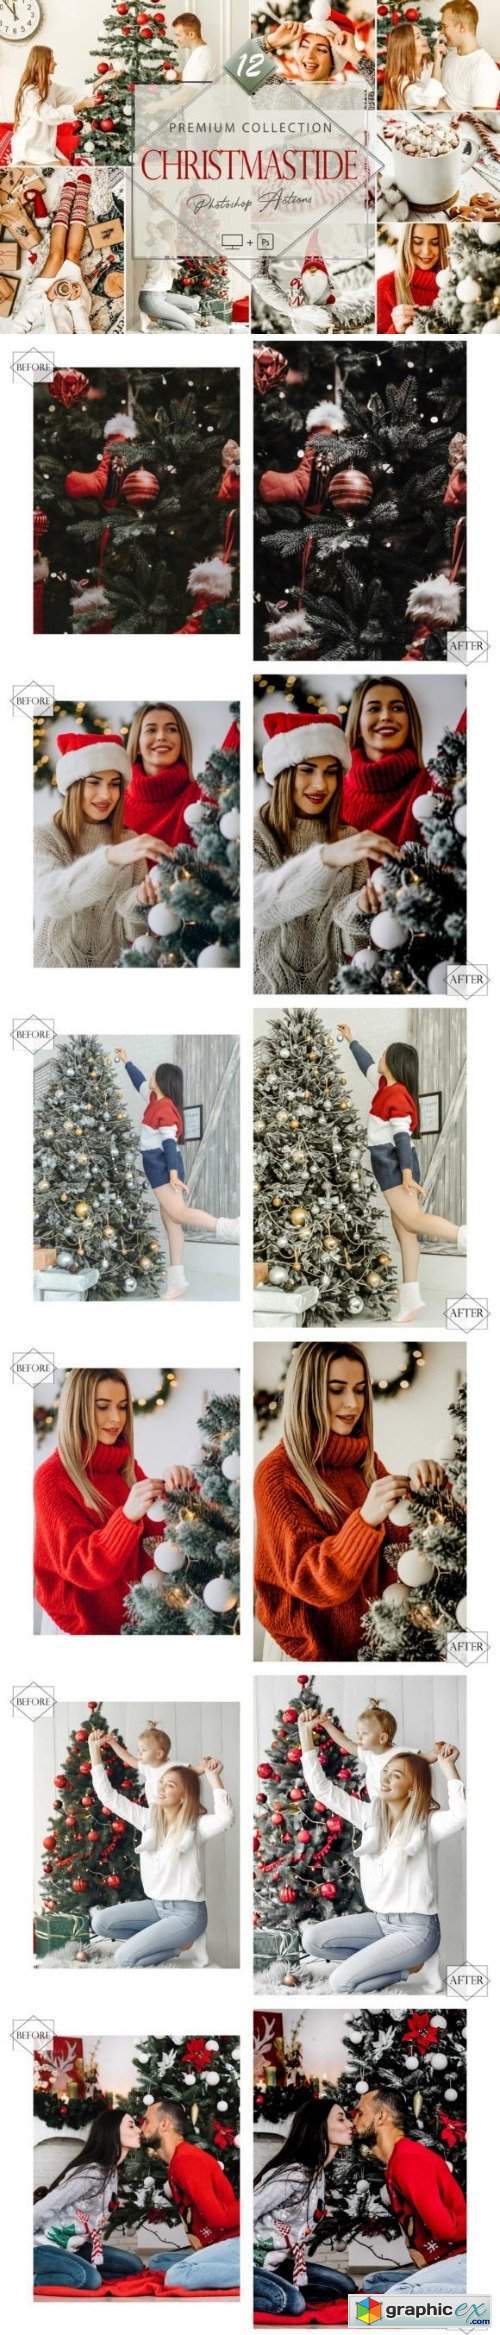 12 Photoshop Actions, Christmastide Psc